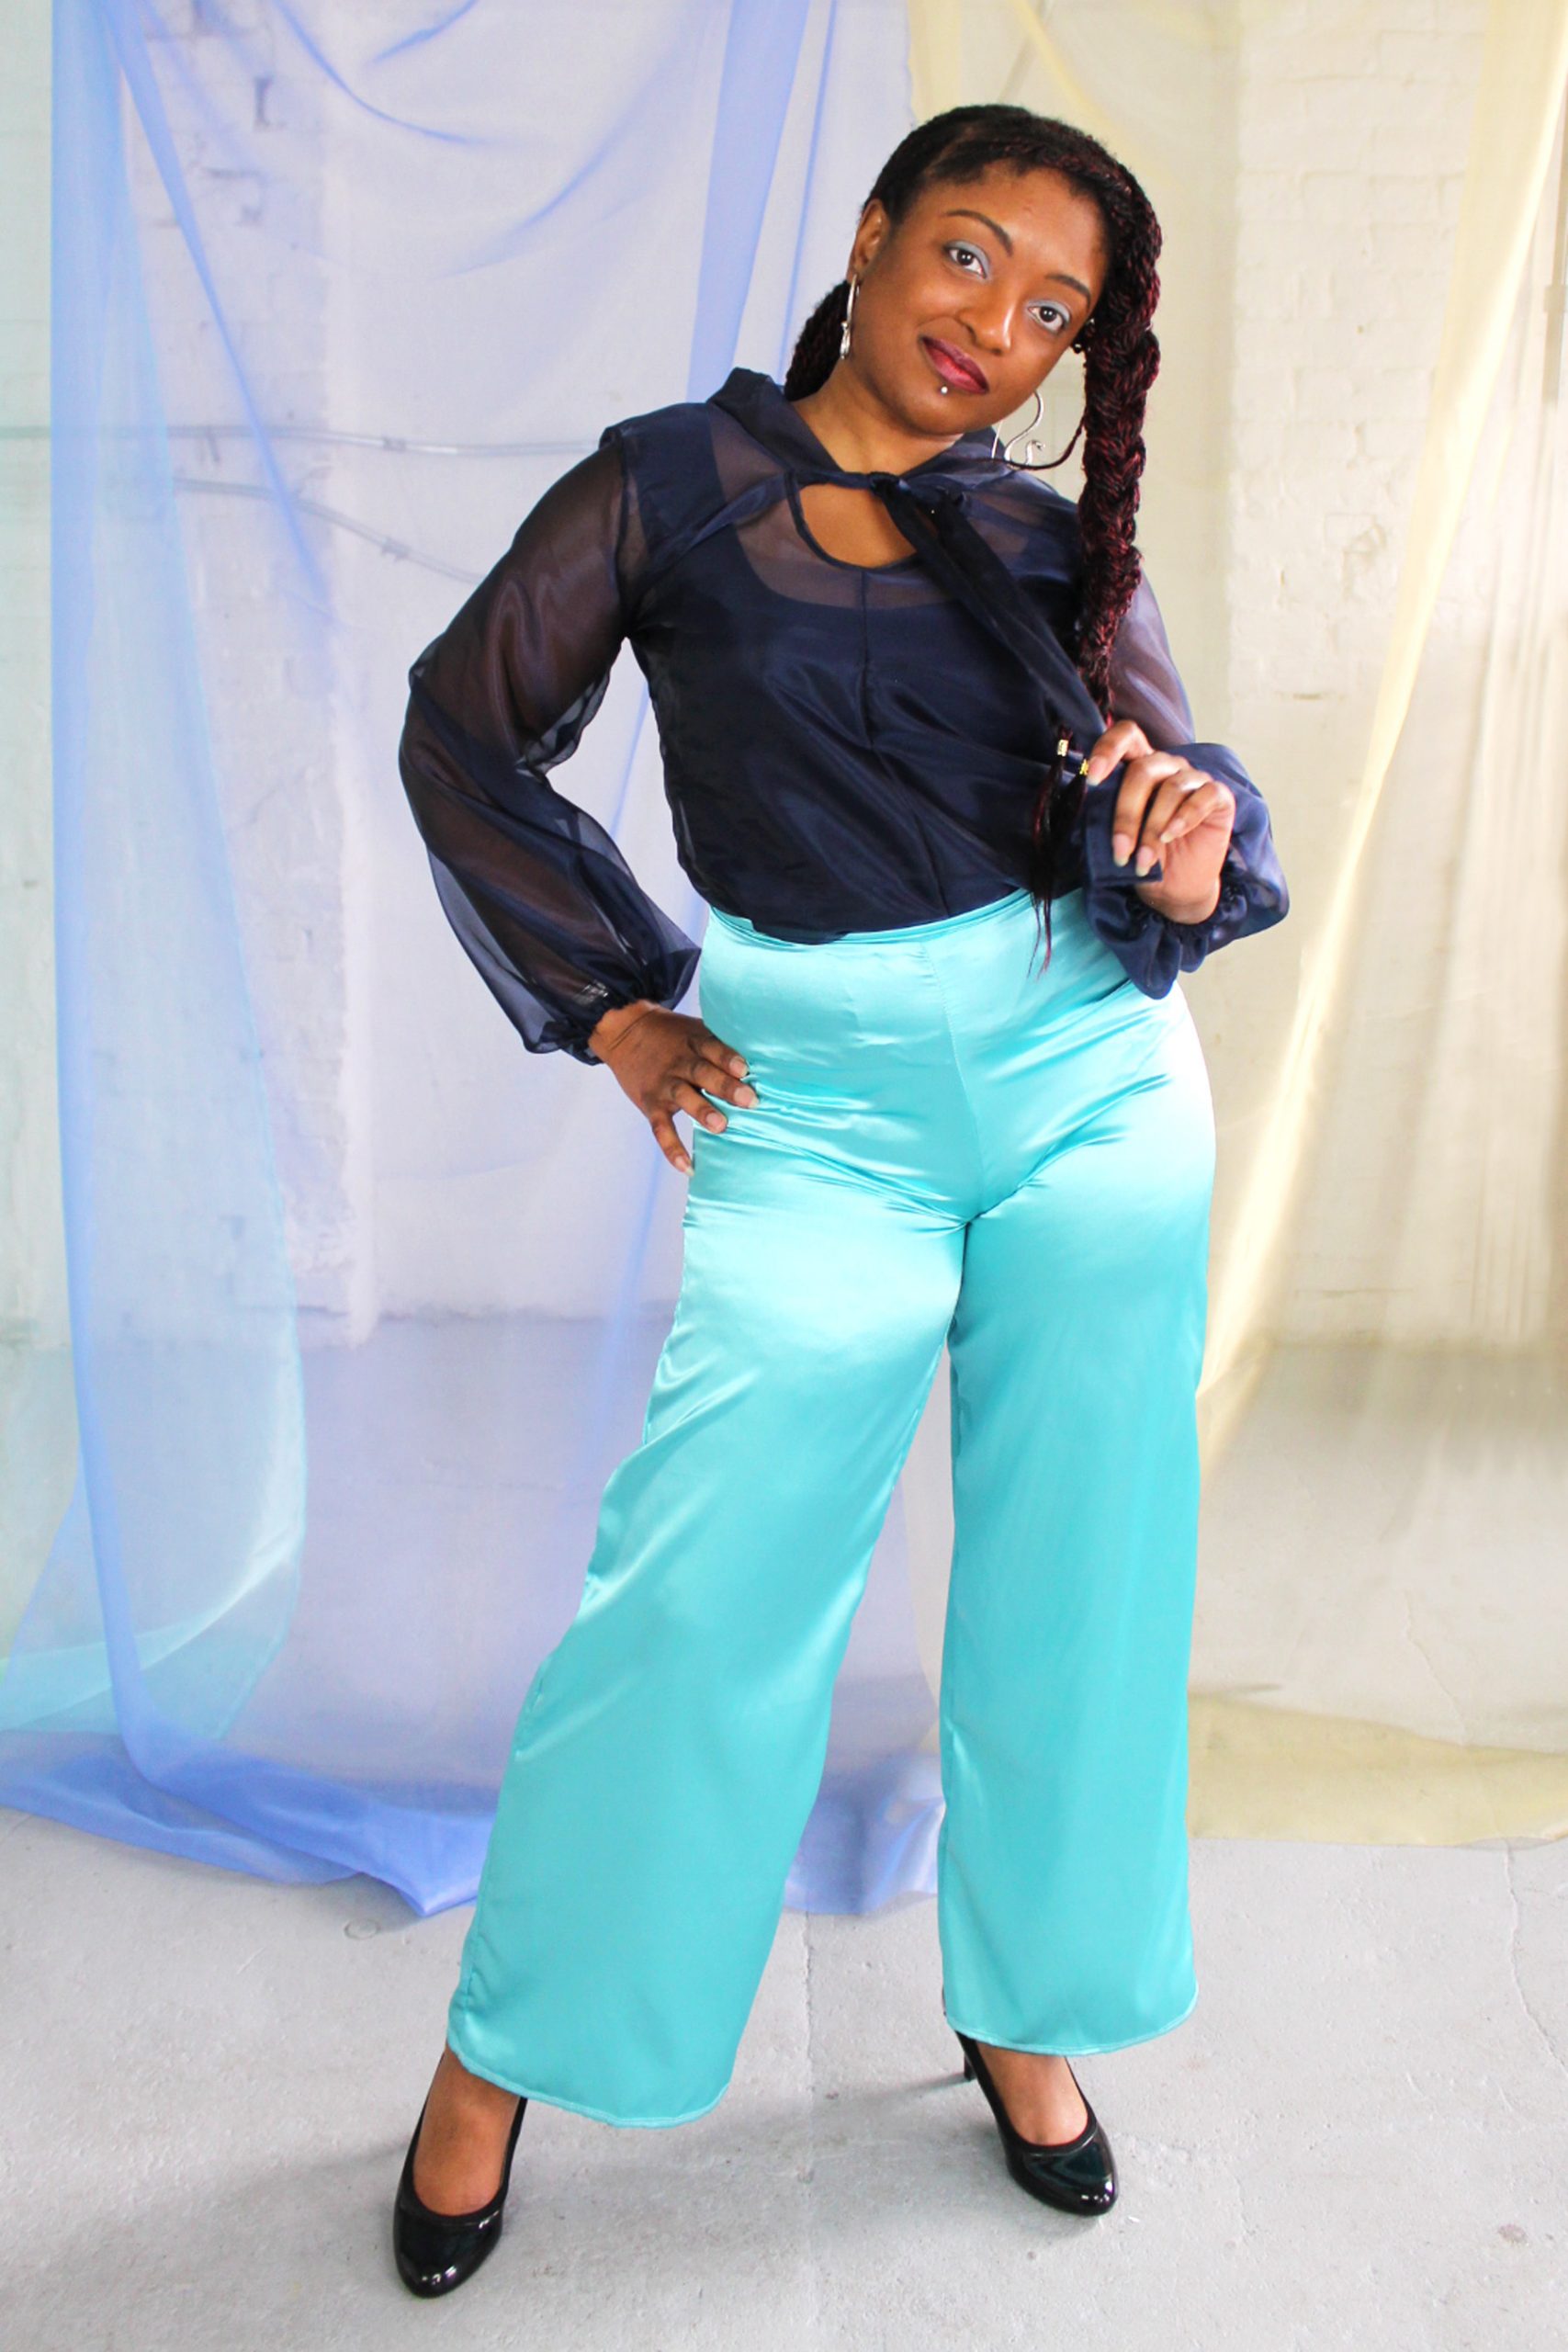 Straight size black model with braided hair wearing navy organza blouse with neck tie + bell sleeves with seafoam satin pants